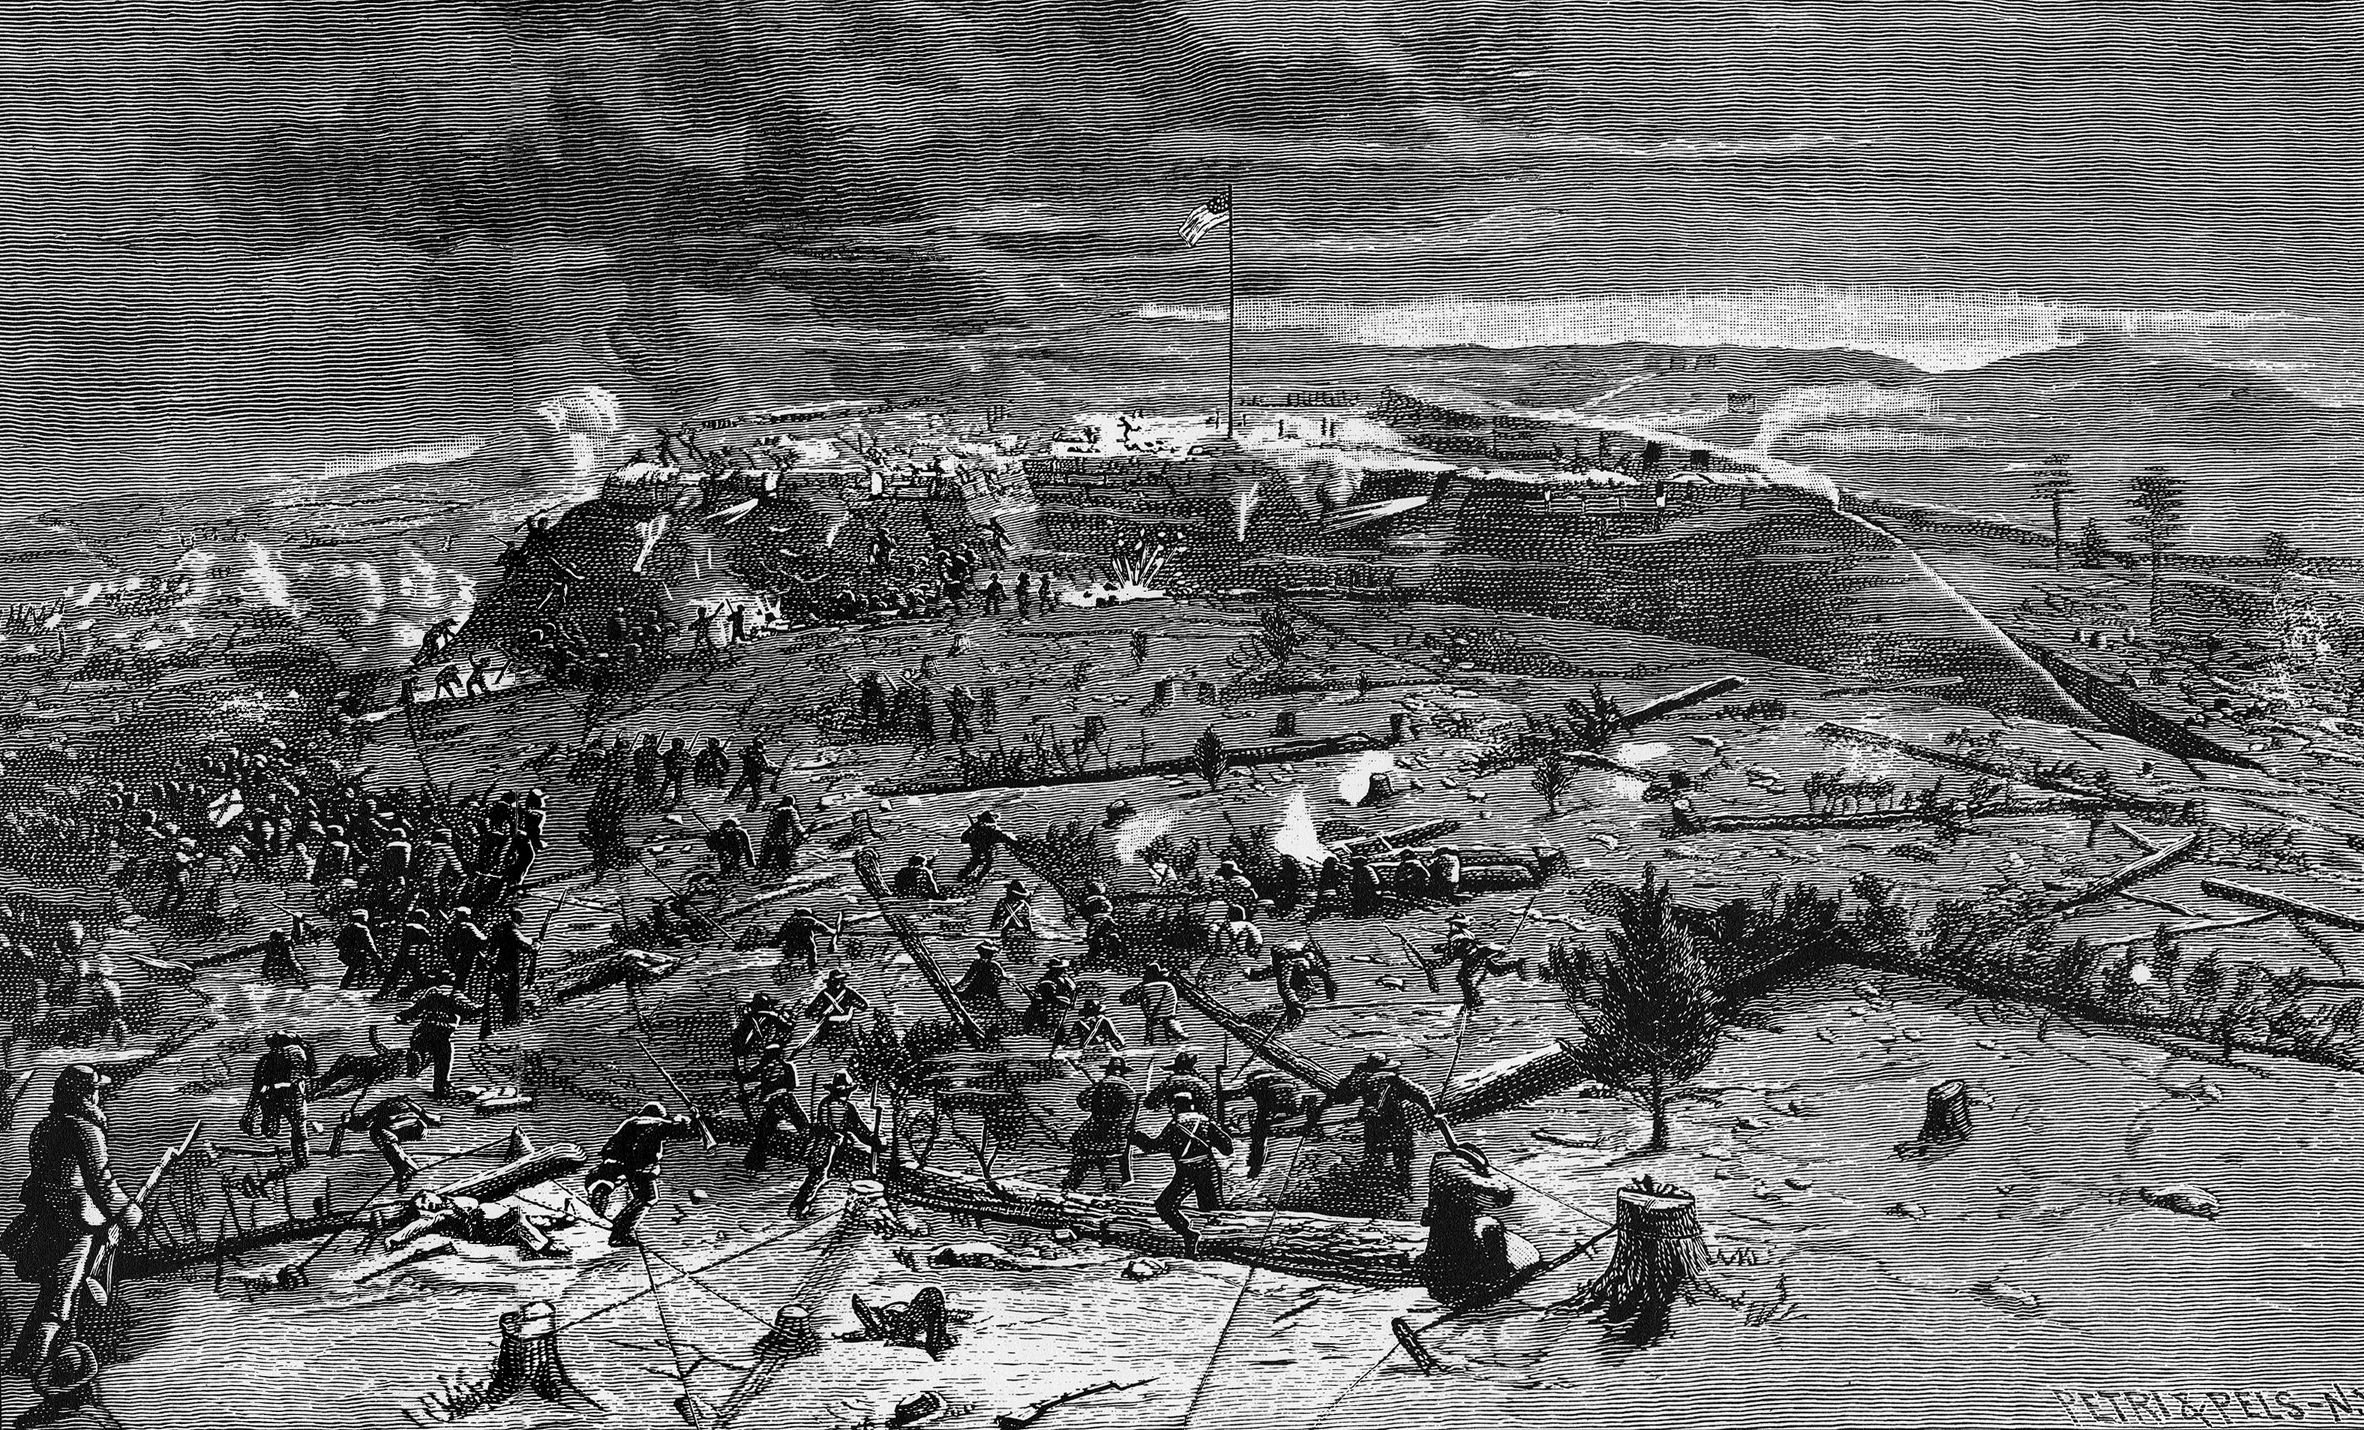 One of the most difficult operations in the Civil War, and one that failed regularly, was the attempt by infantry to storm strongly held field fortifications. Following their orders, clusters of Confederates desperately try to fight their way uphill to Fort Sanders.